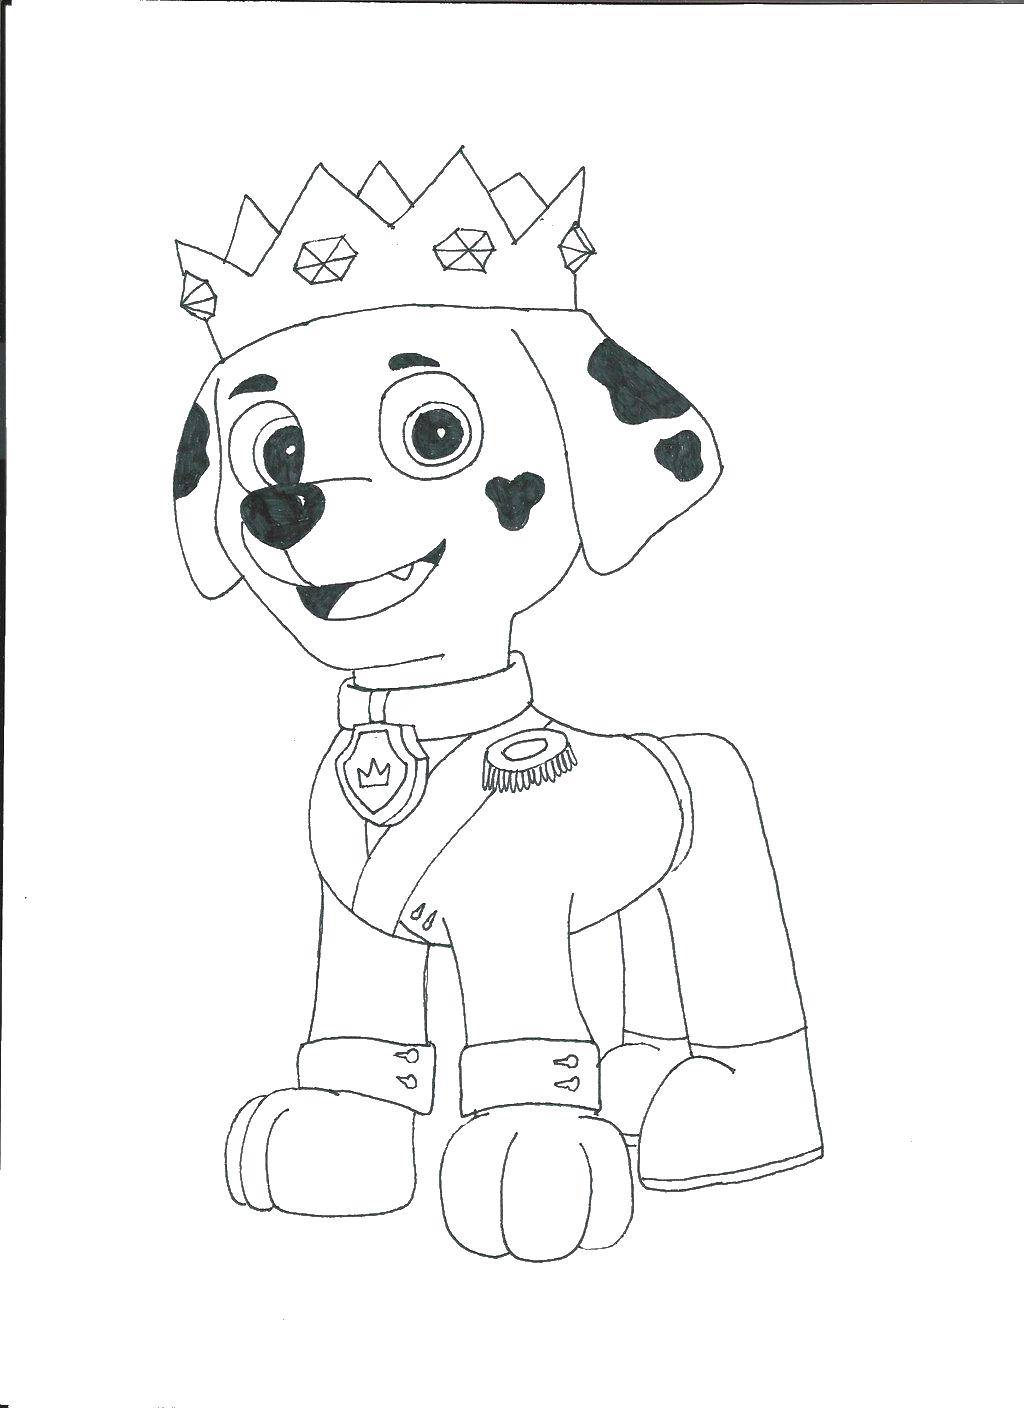 Coloring Dalmatians Marshal of the crown. Category paw patrol. Tags:  Paw patrol.